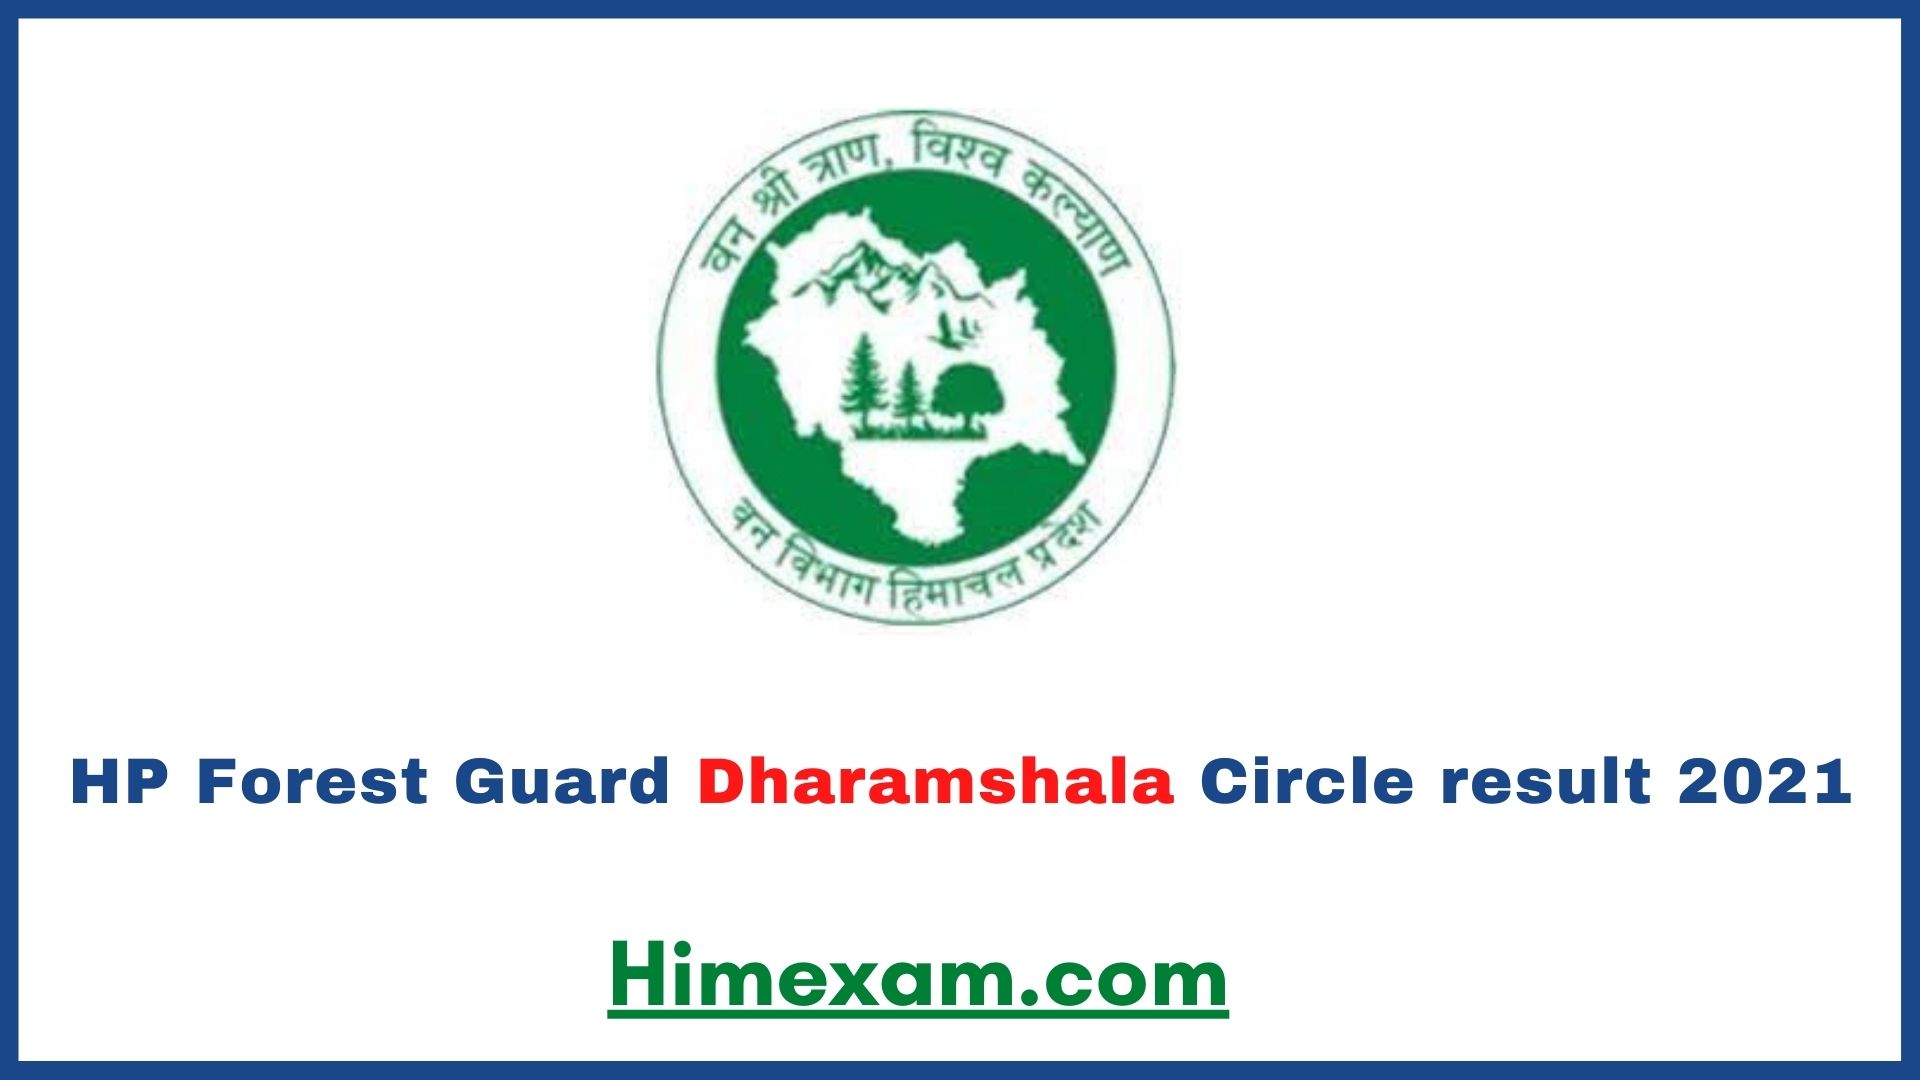 HP Forest Guard Dharamshala Circle result 2021